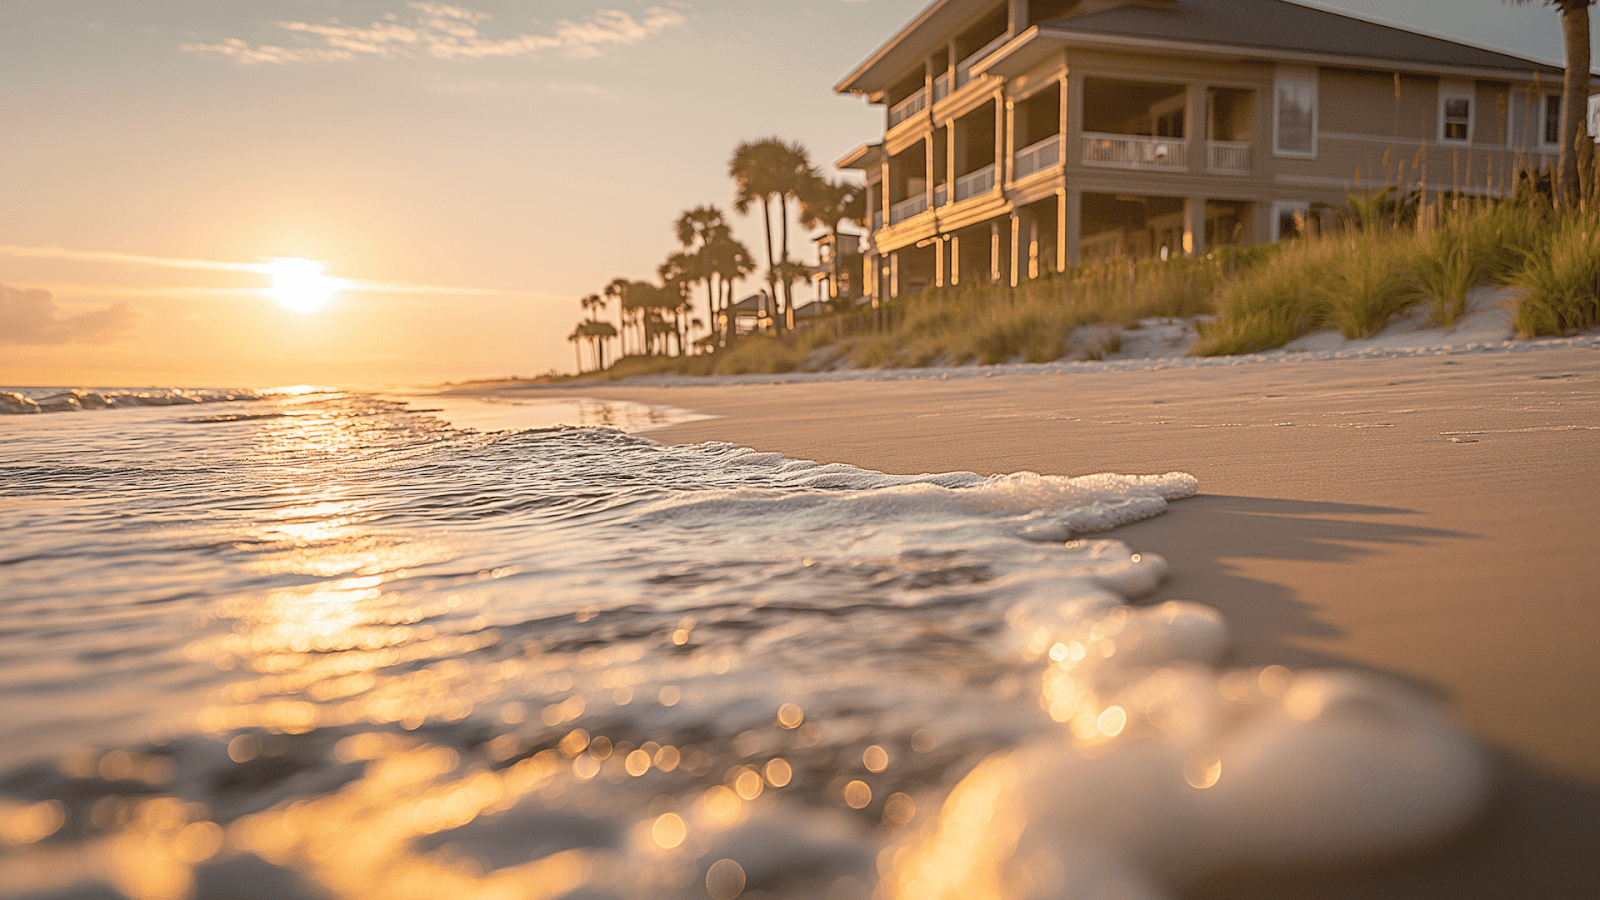 A sunset view with a gentle wave at a beach in Palmetto Dunes highlighting serene places to go swimming